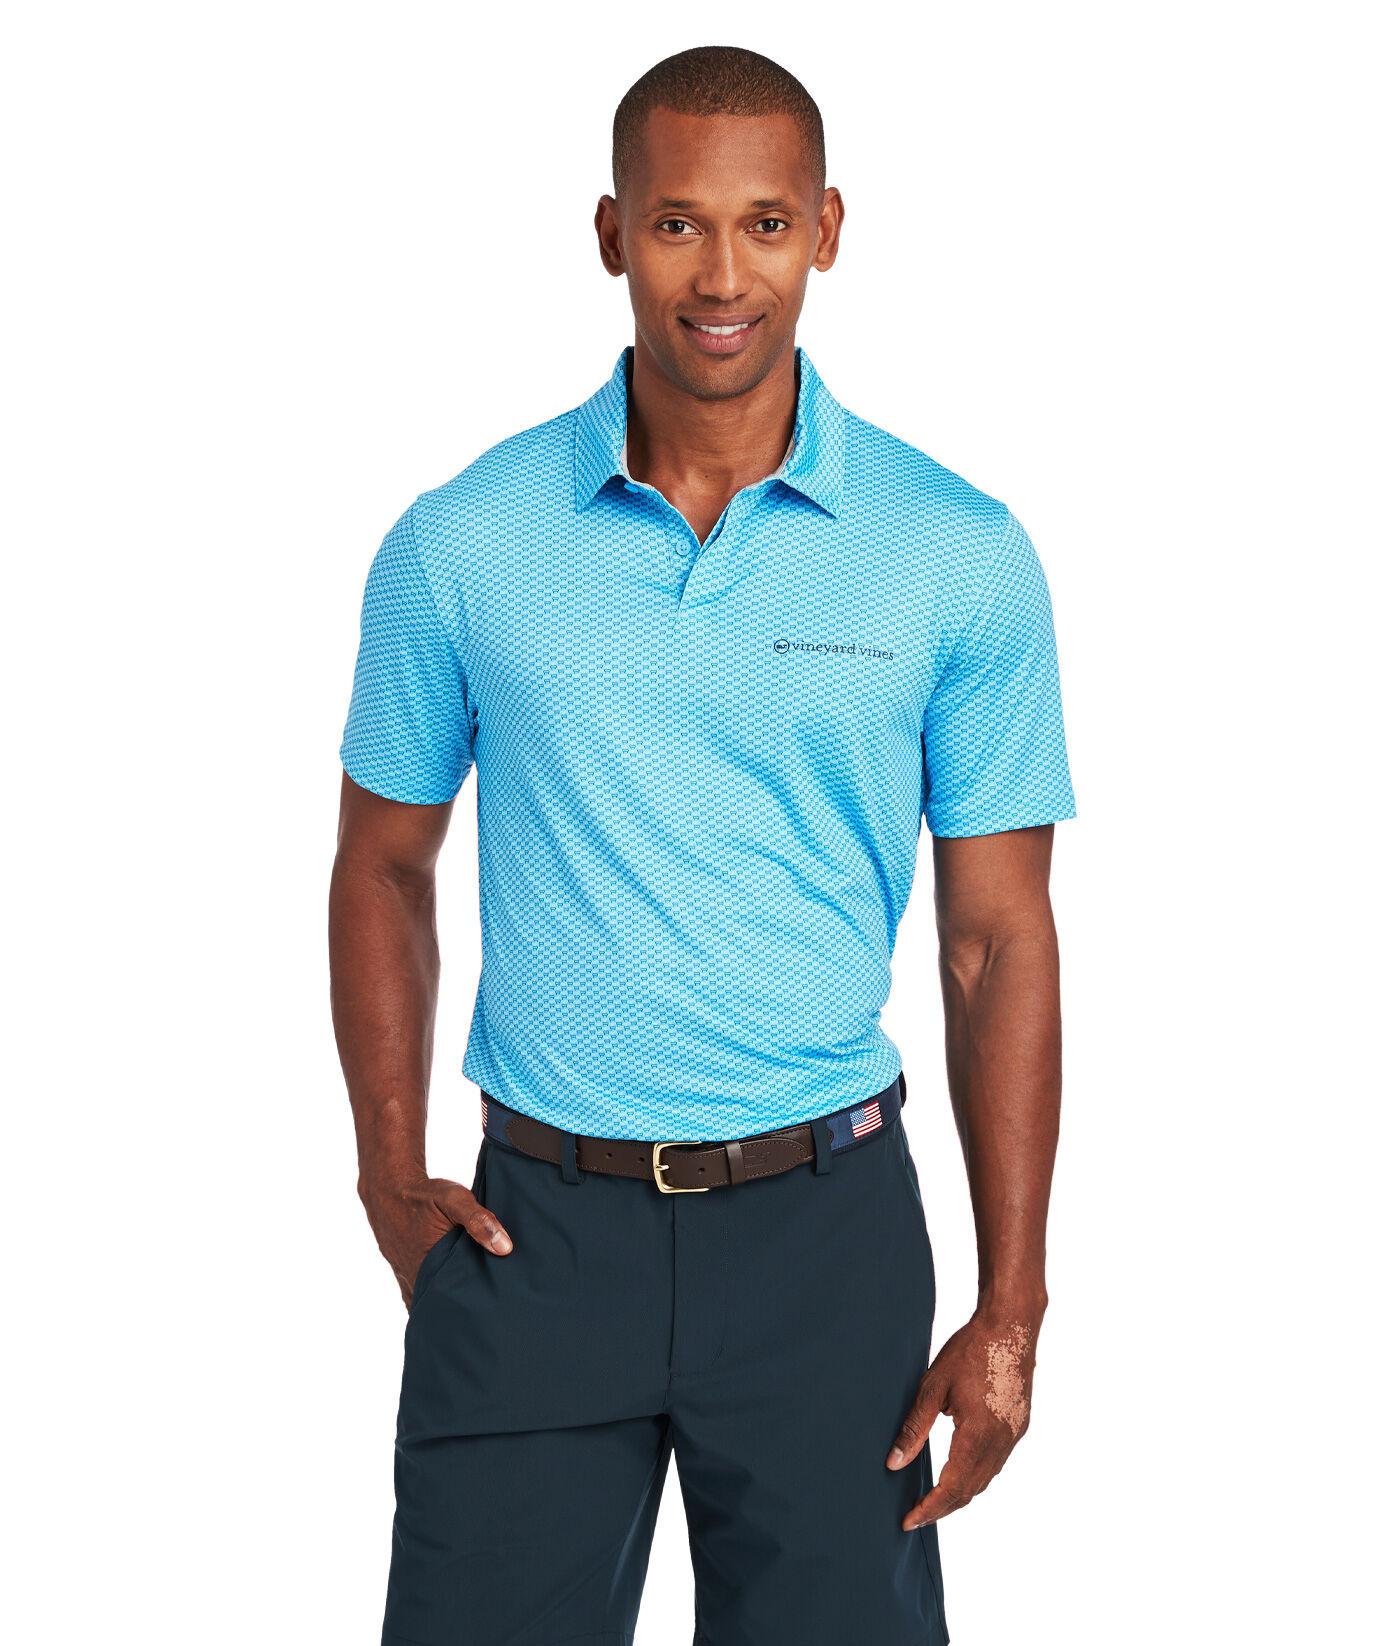 Vineyard Vines Synthetic Printed Bowline Polo Shirt in Blue for Men - Lyst